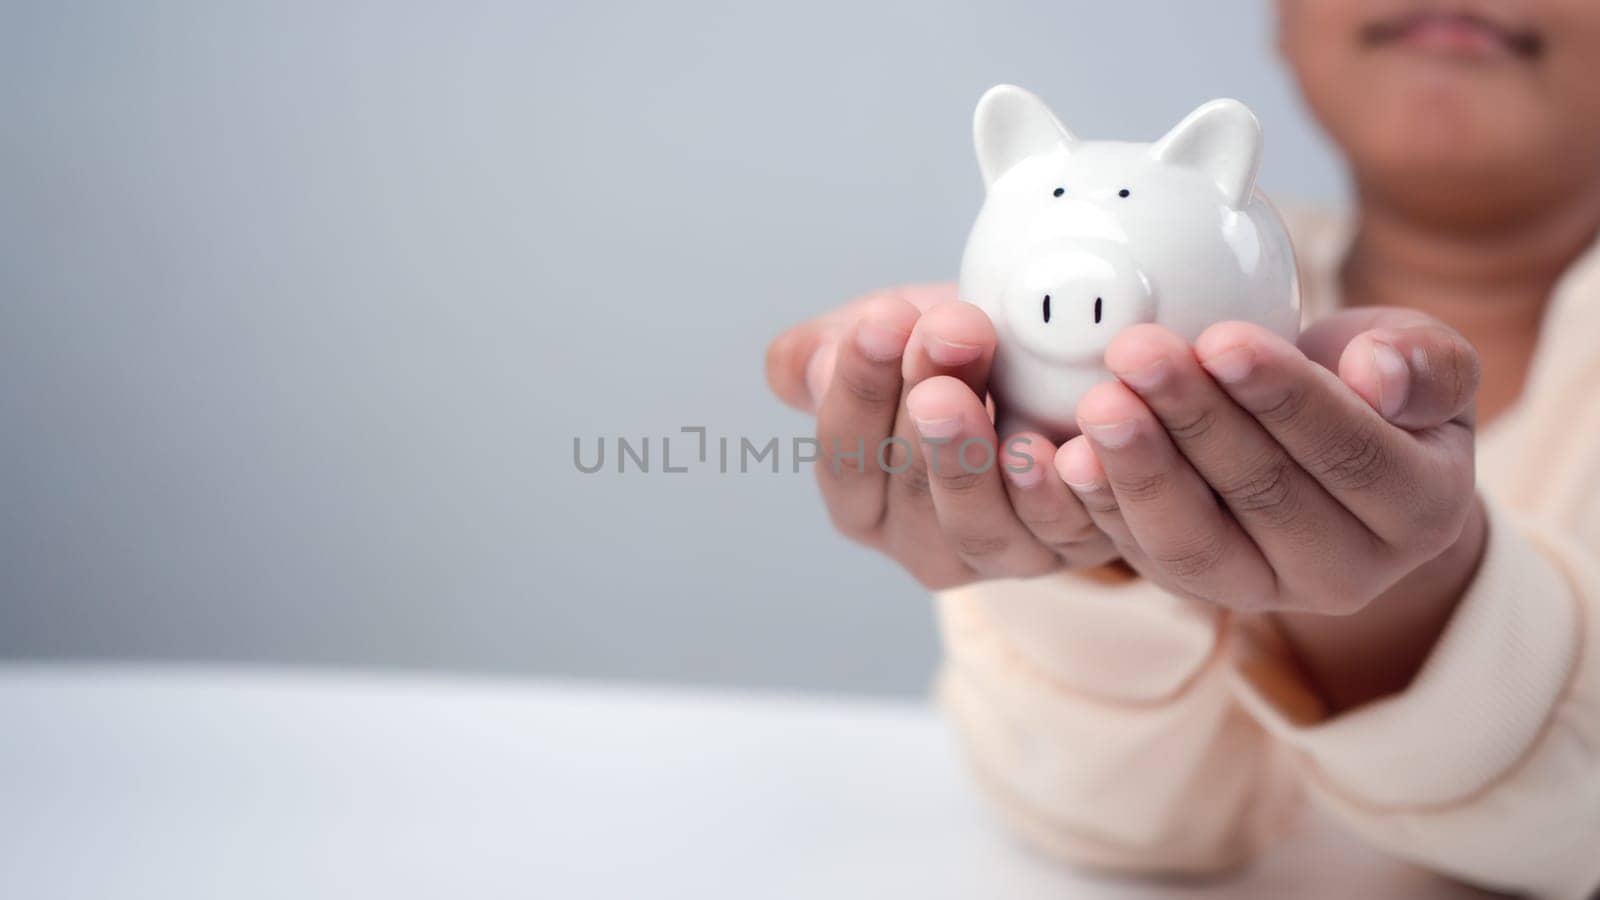 A boy holding piggy bank. Learning financial responsibility and projecting savings. savings concept. investment concept.